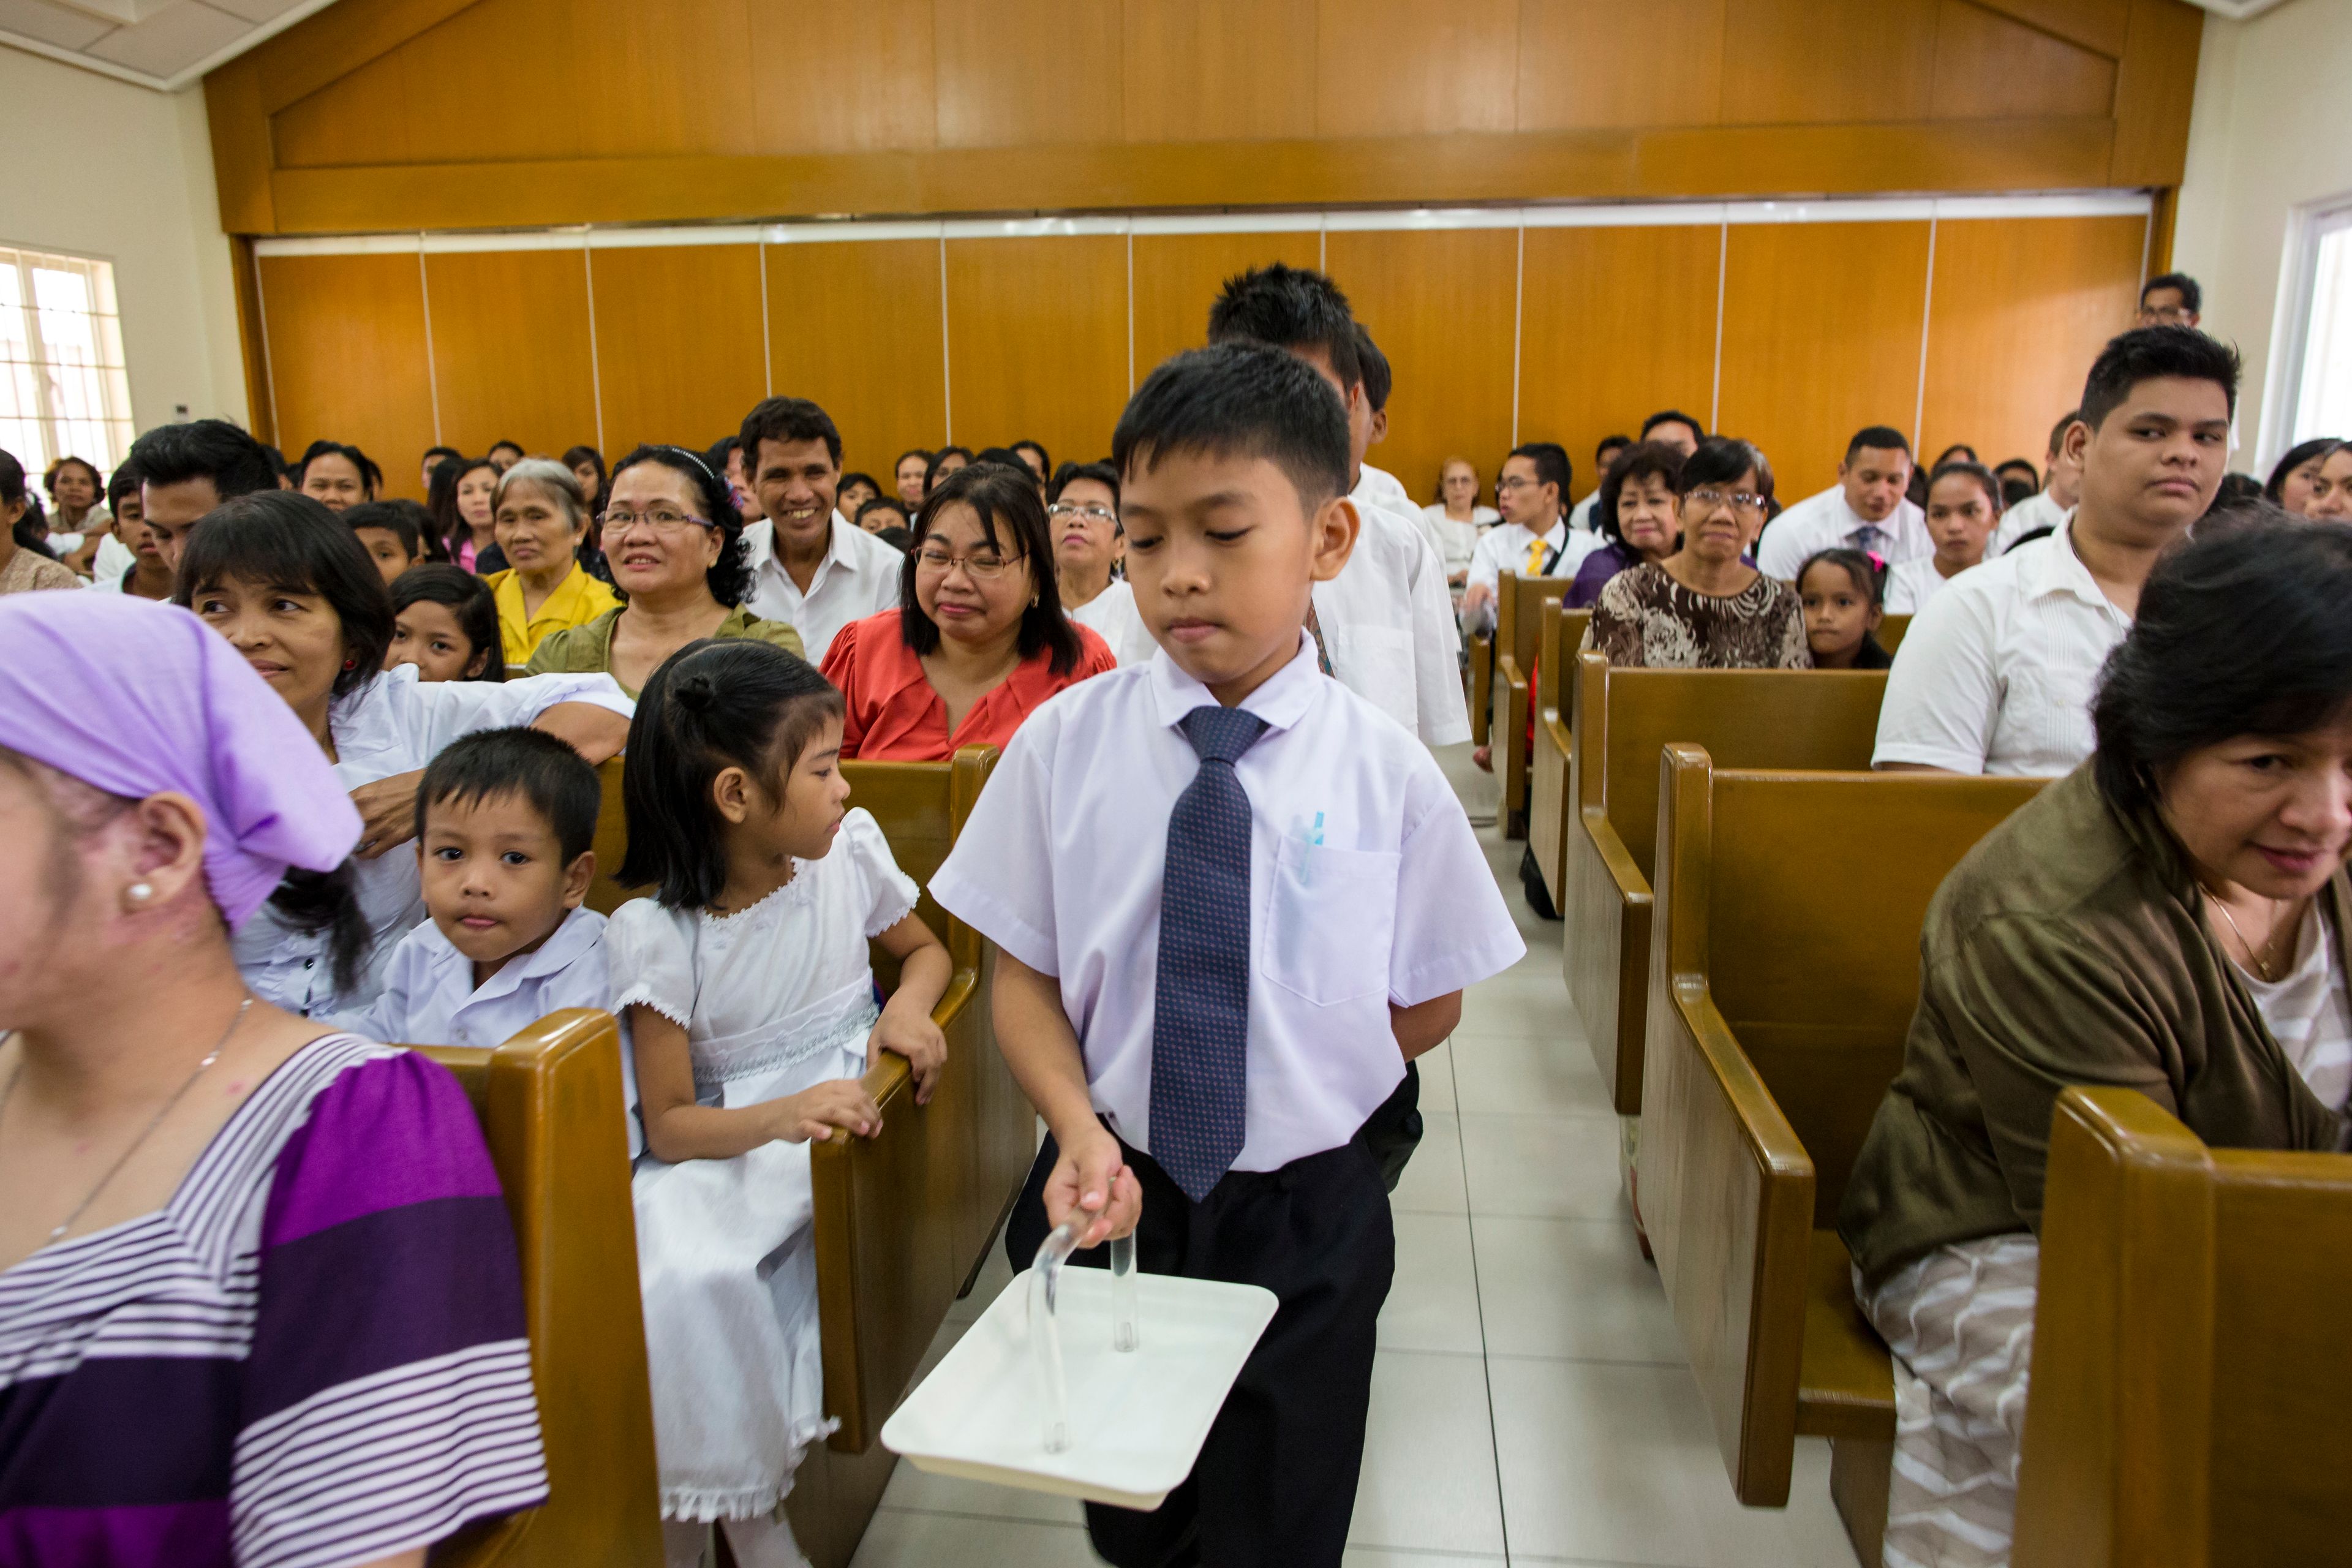 A row of deacons passing the sacrament in a congregation in the Philippines.